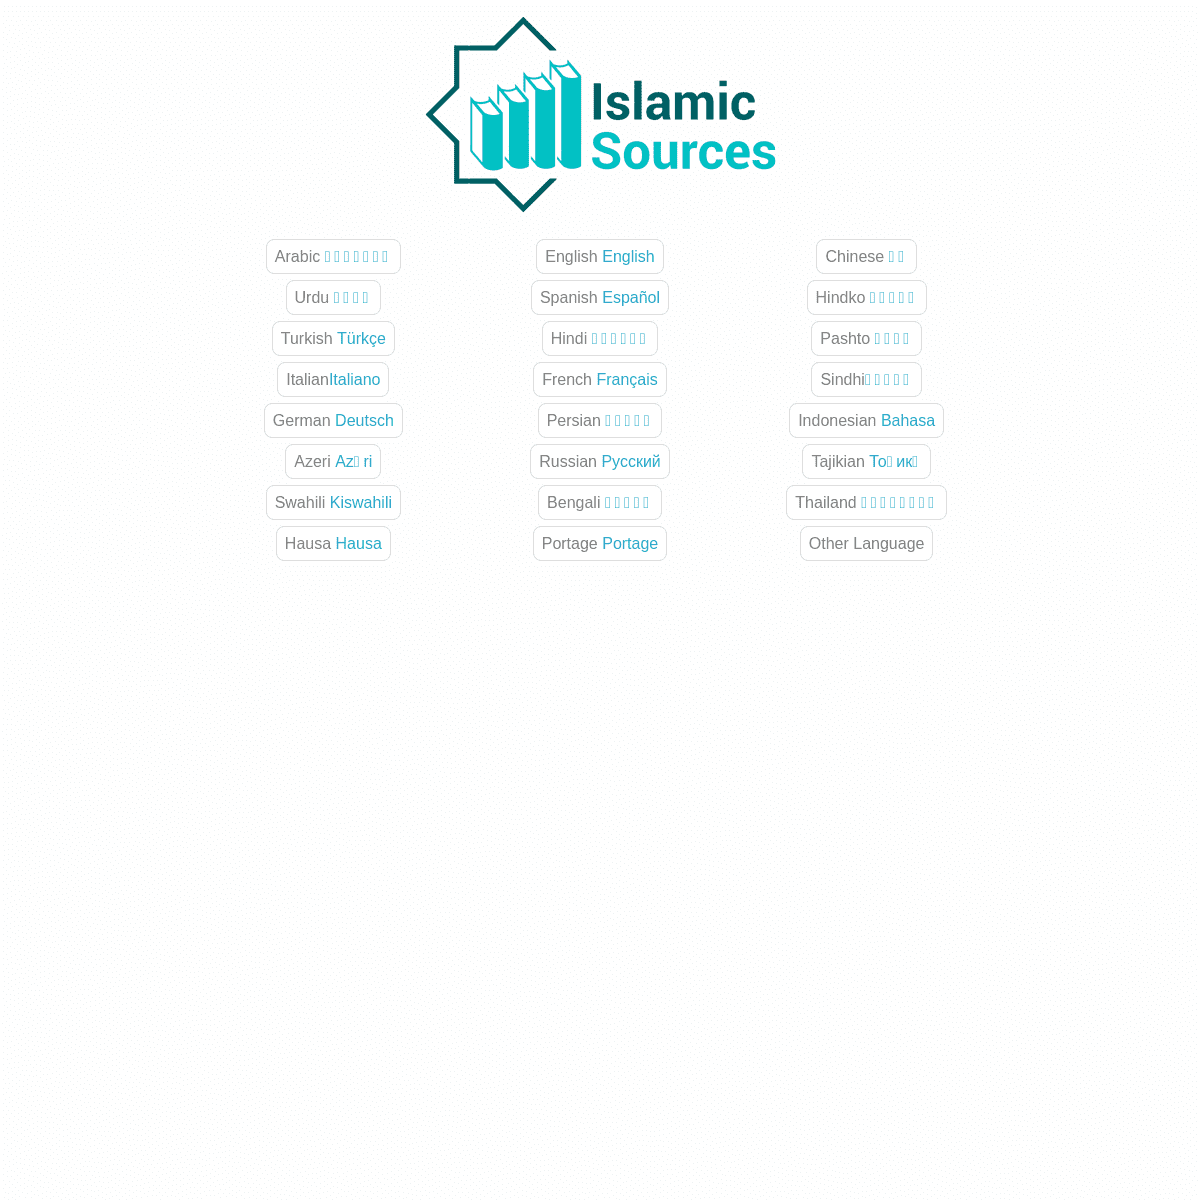 A complete backup of islamic-sources.com